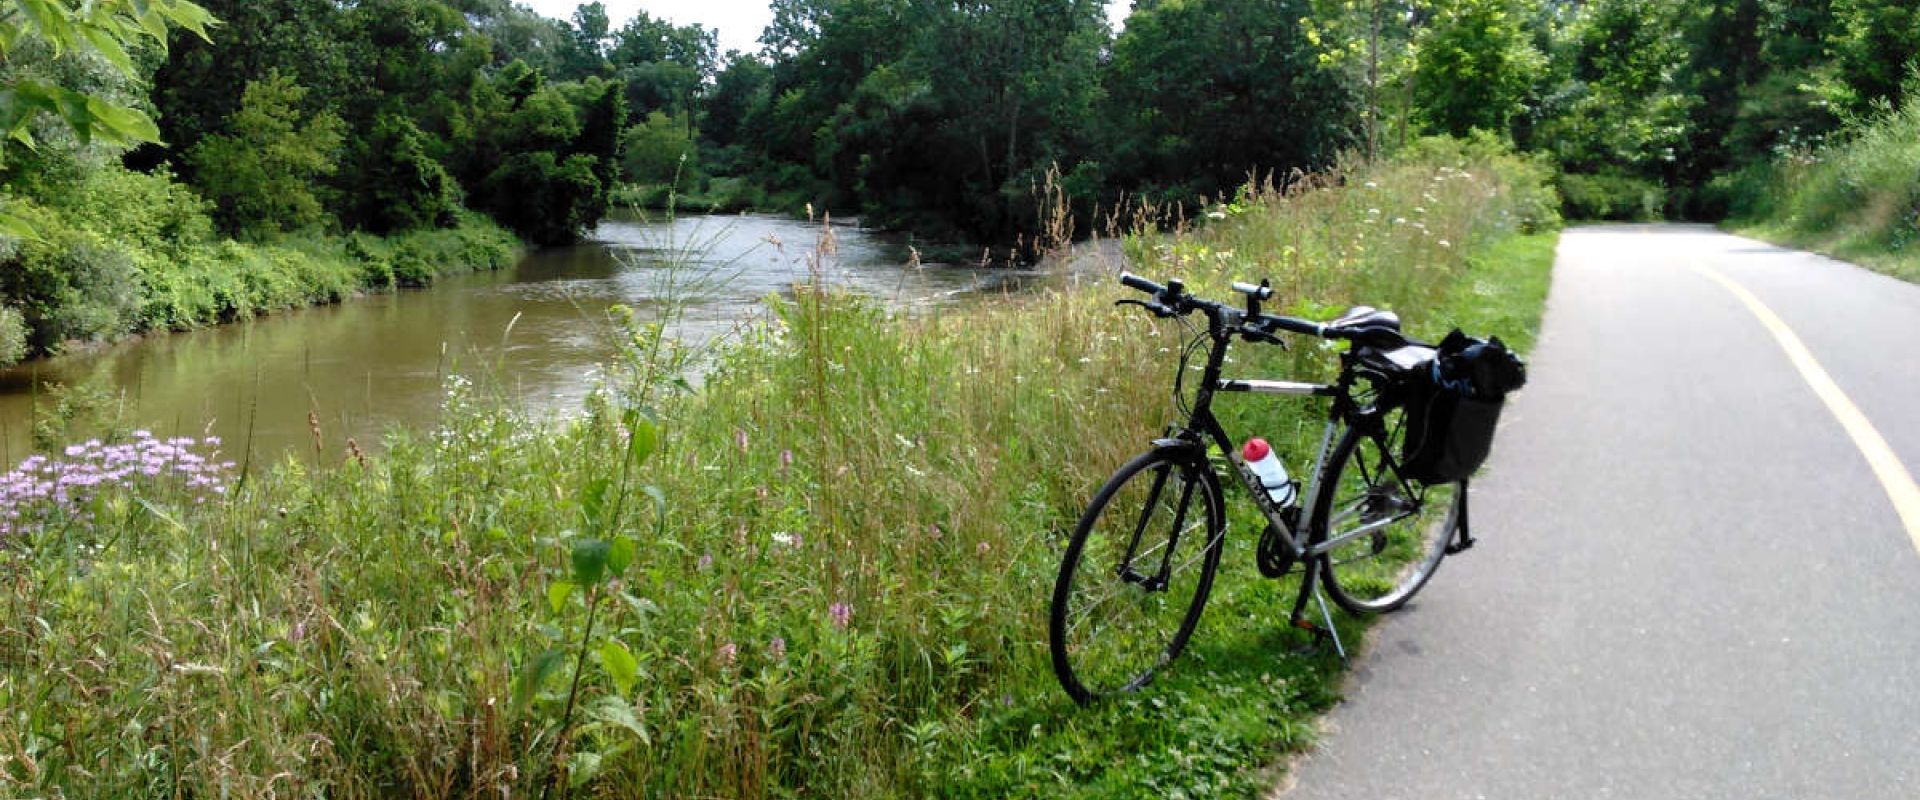 The Thames Valley Parkway is a paved 2-lane pathway available for walking, running, biking, and more. A bicycle is parked alongside the Thames River.